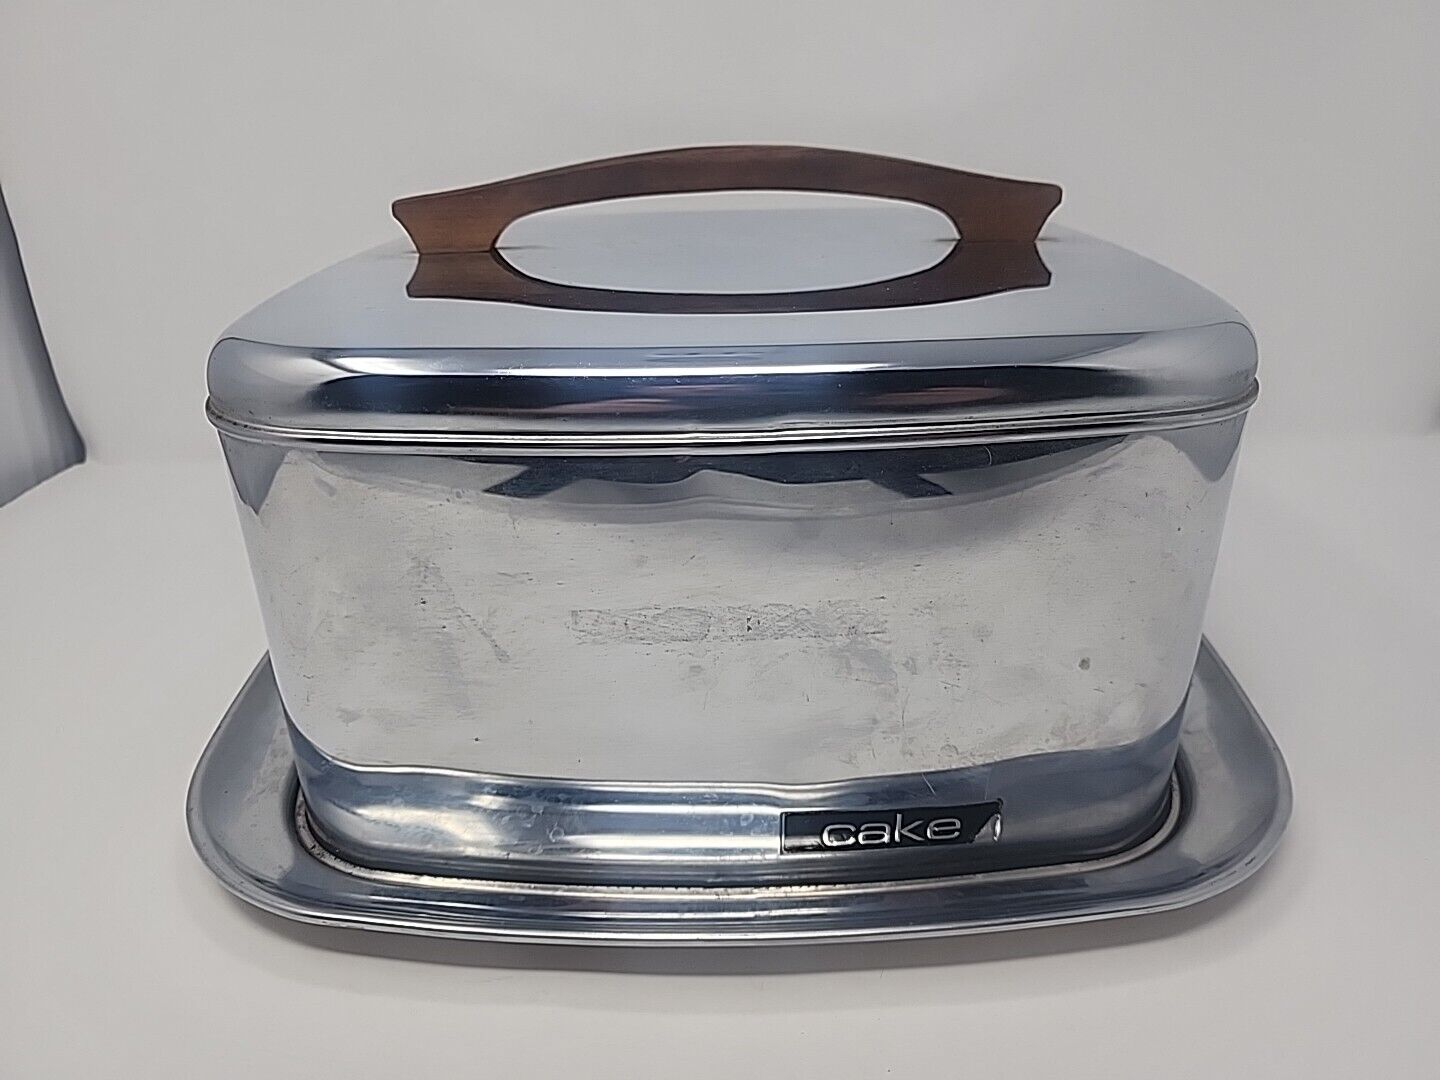 Vintage 1950s Lincoln Beautyware Chrome Cake Carrier Saver Locking Lid Square